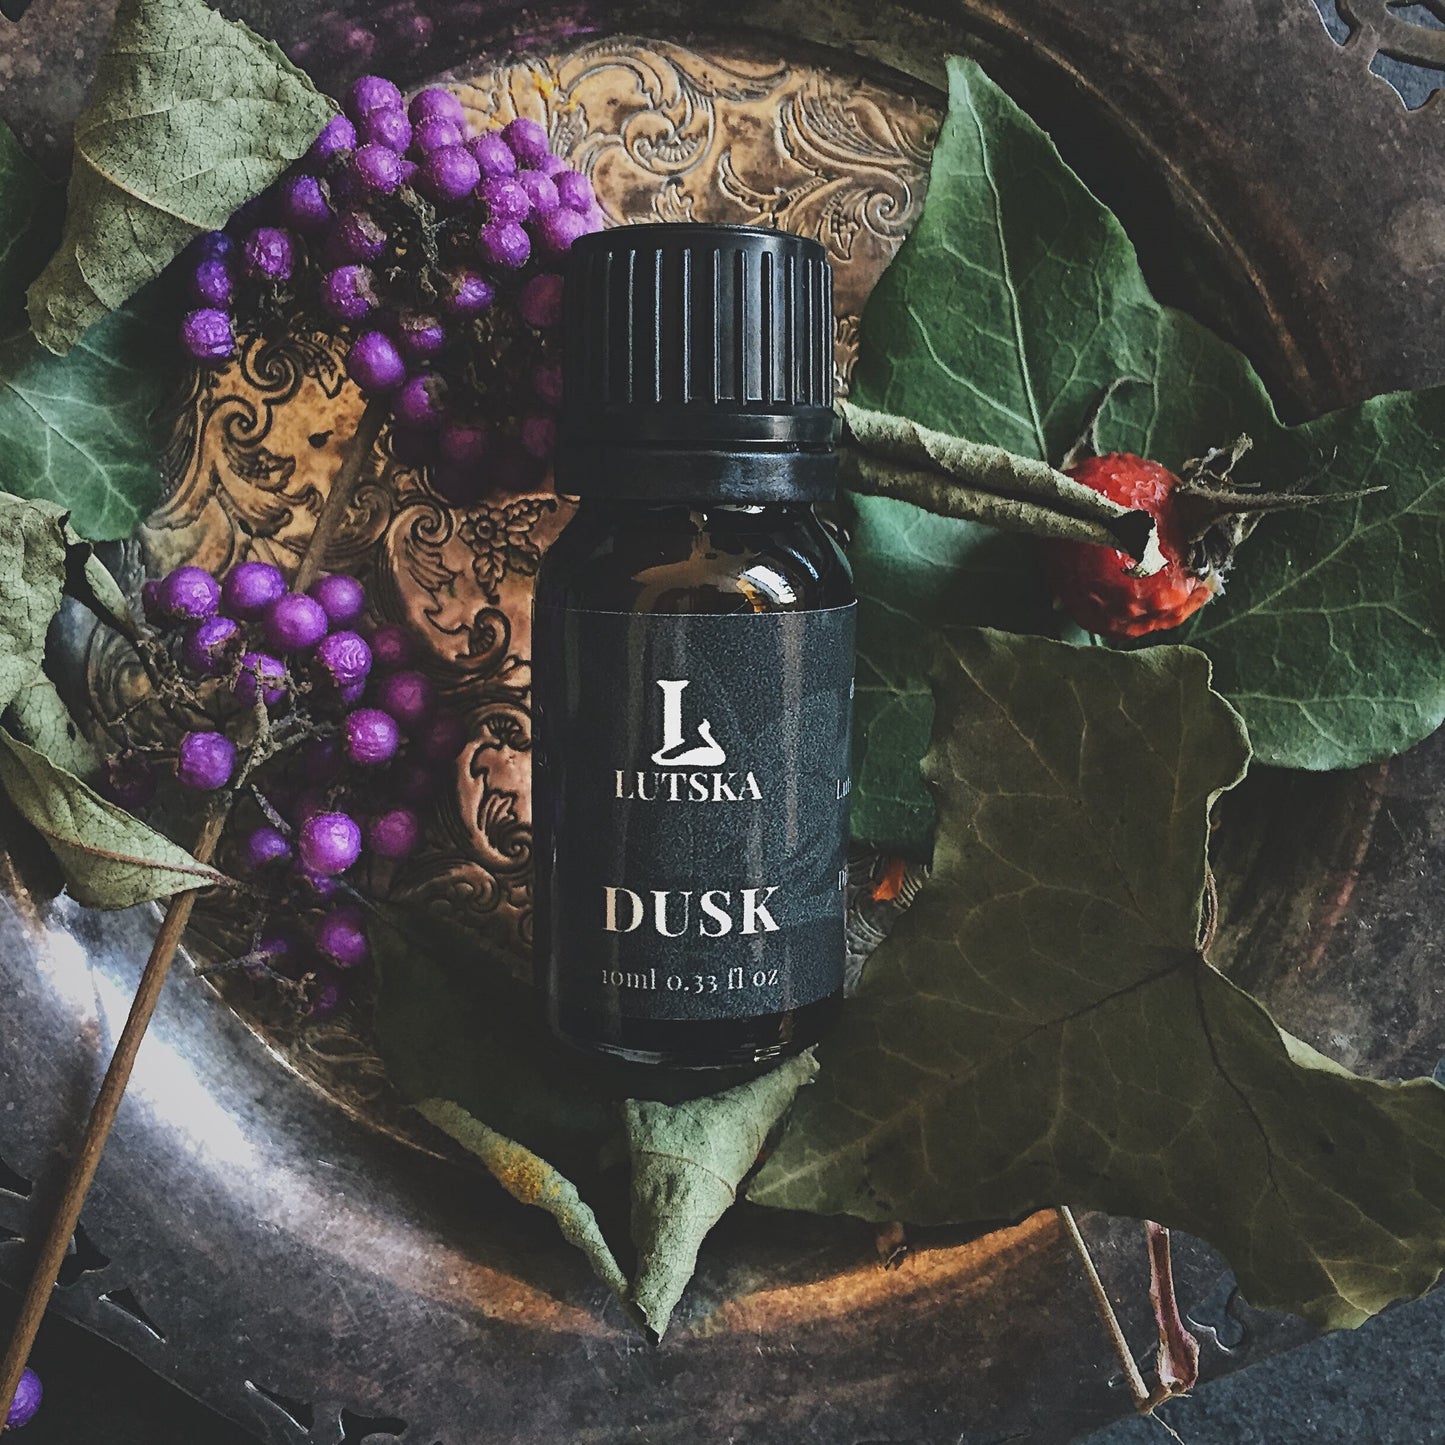 dusk essential oil blend natural aromatherapy made in canada by lutska botanica